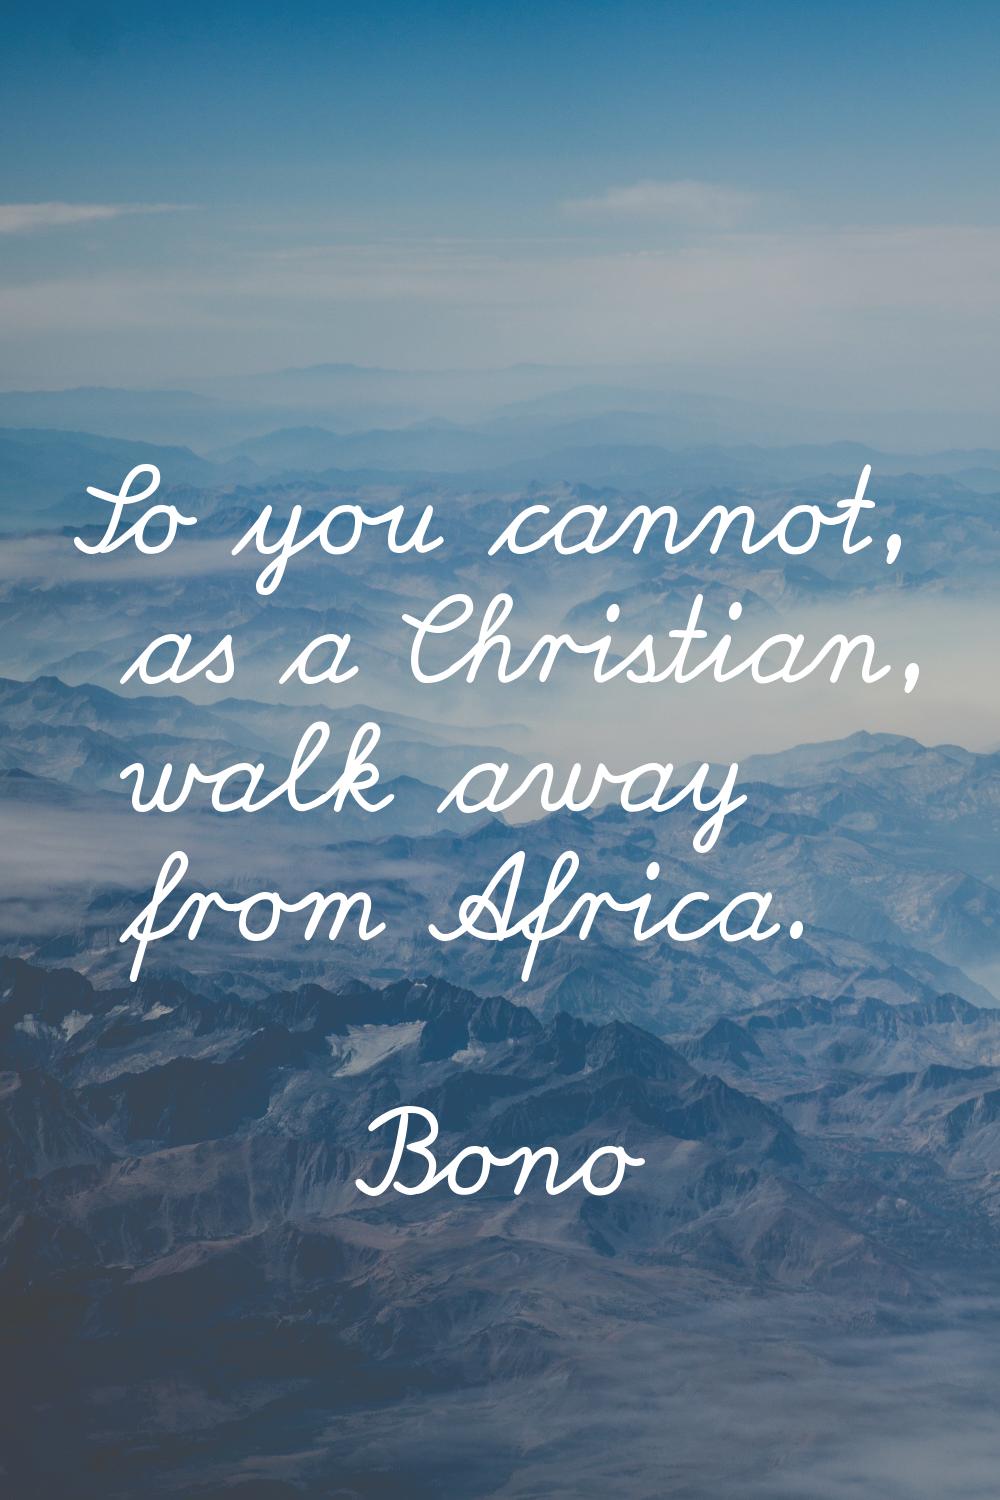 So you cannot, as a Christian, walk away from Africa.